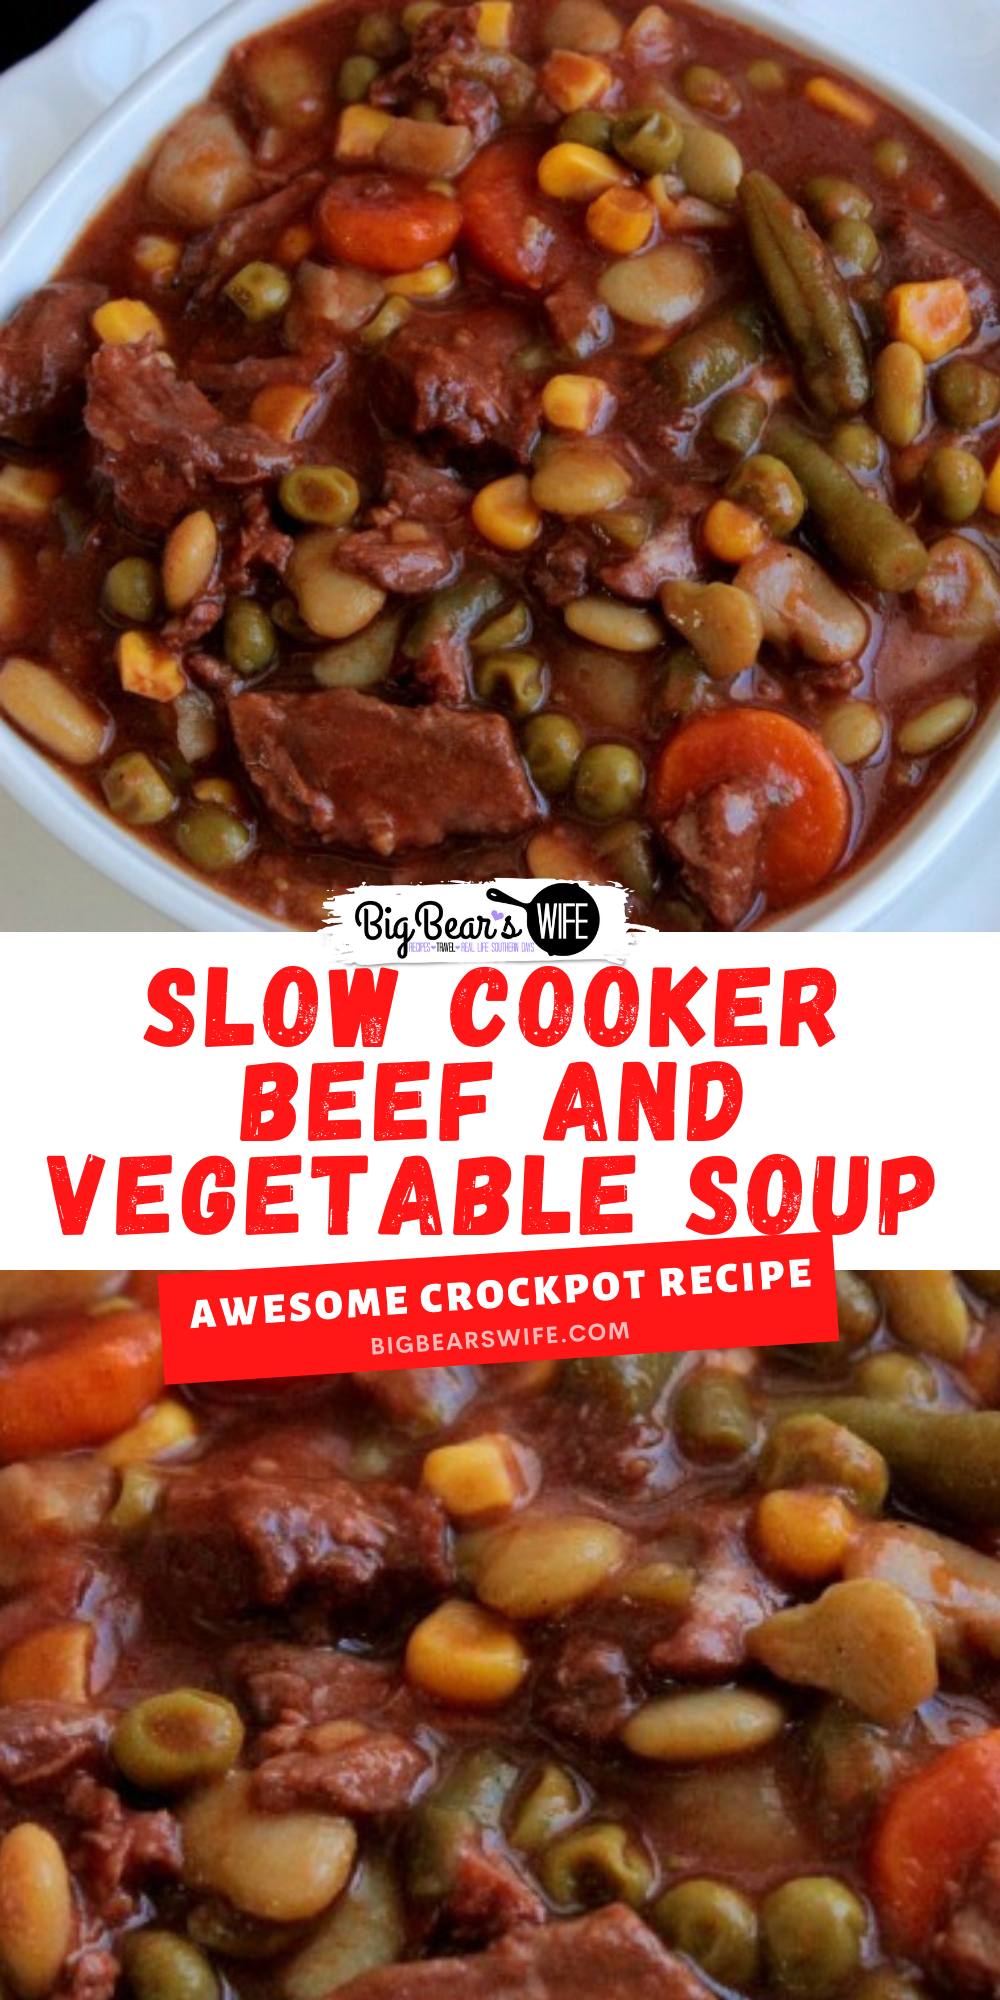 A Slow Cooker Beef and Vegetable Soup that is inspired by my grandmother's vegetable soup! We love this and make it all the time!  via @bigbearswife